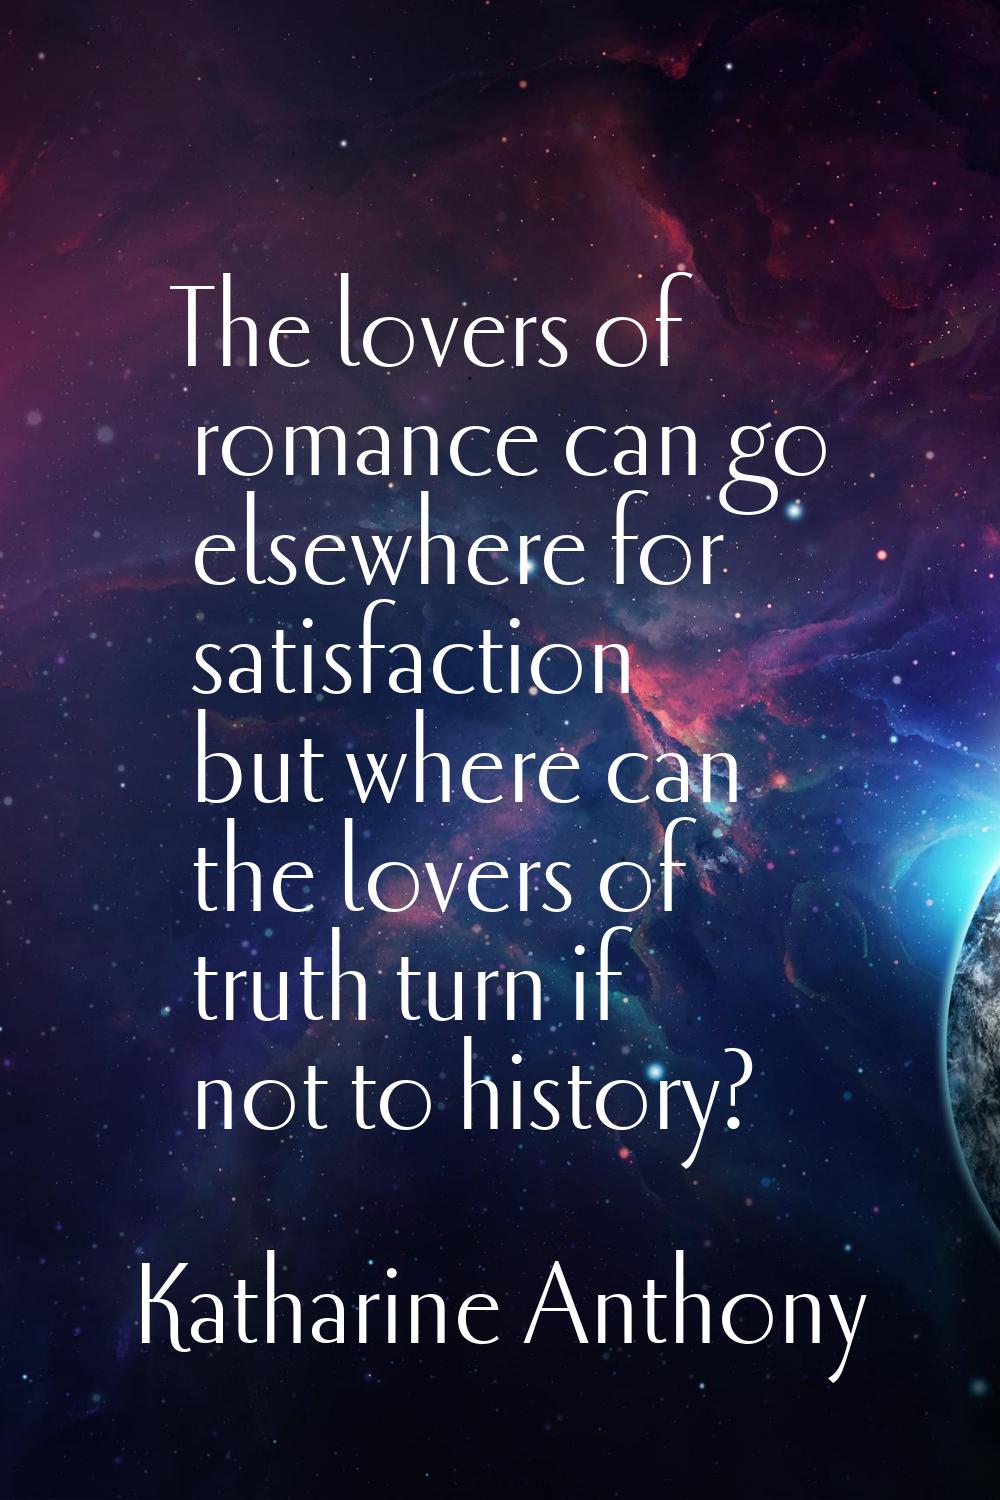 The lovers of romance can go elsewhere for satisfaction but where can the lovers of truth turn if n